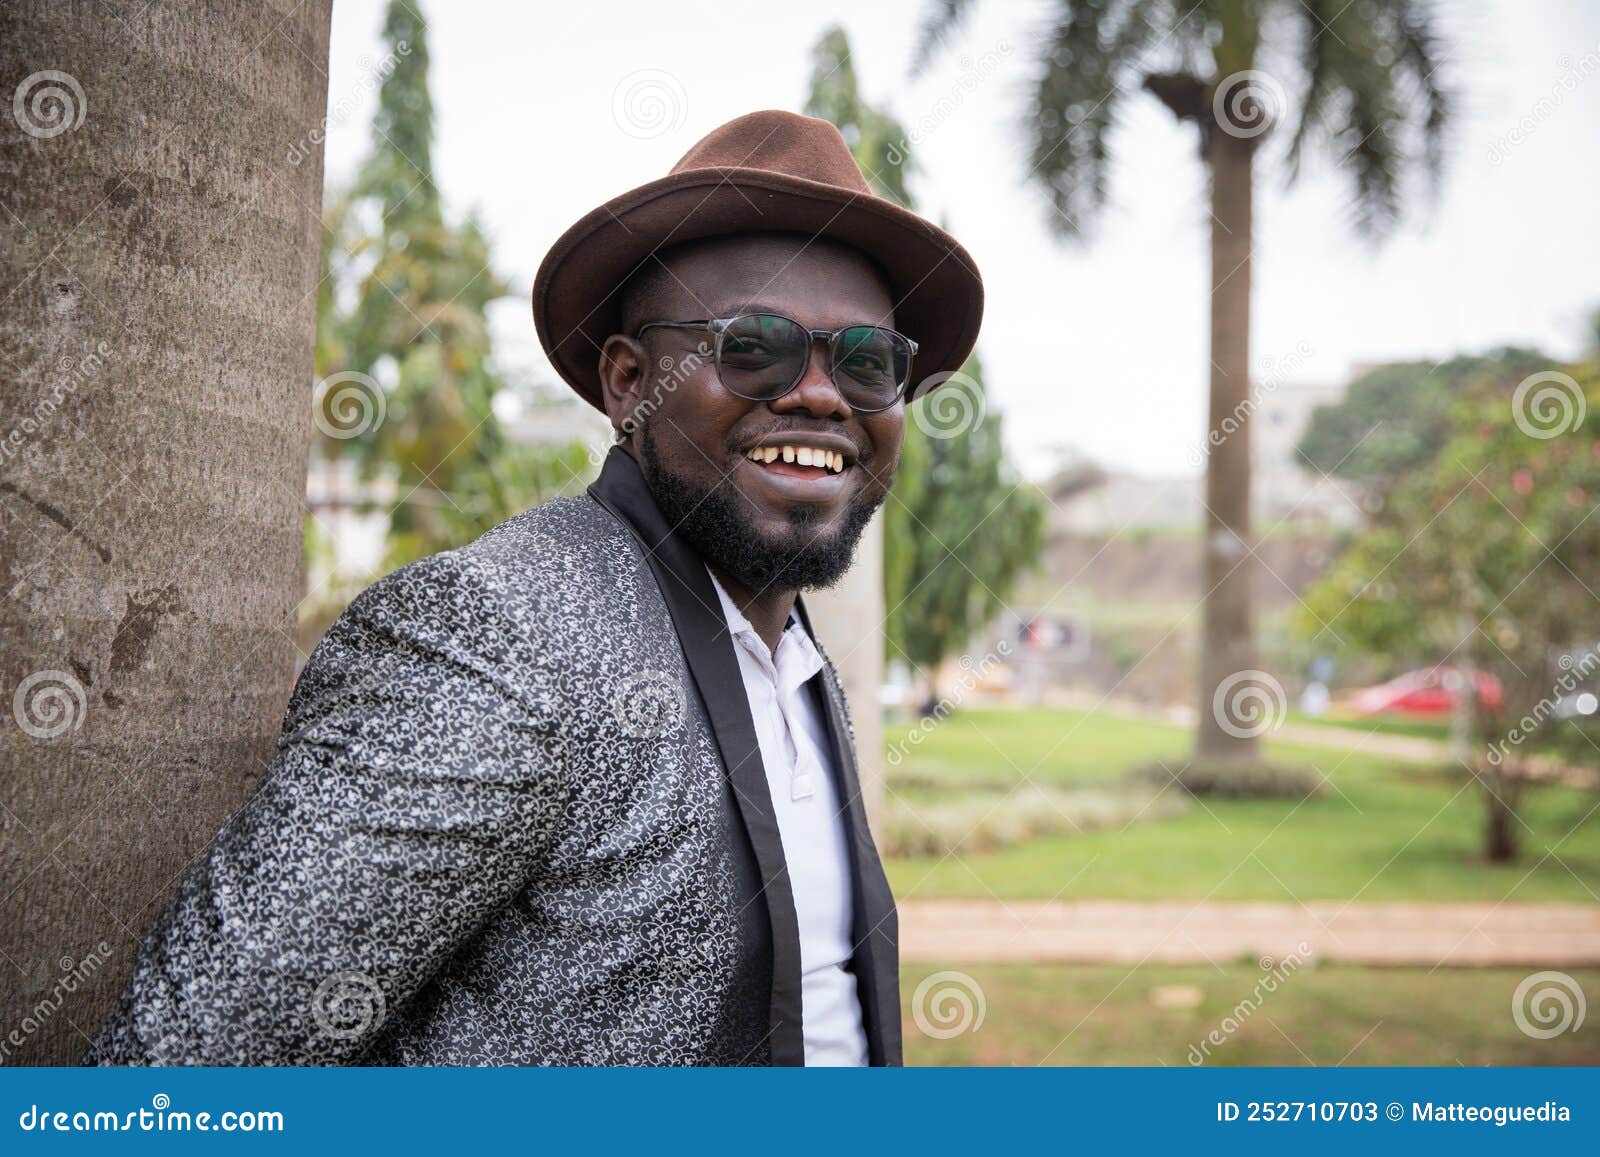 stylish african businessman looks smilingly around in the park. outdoor concept